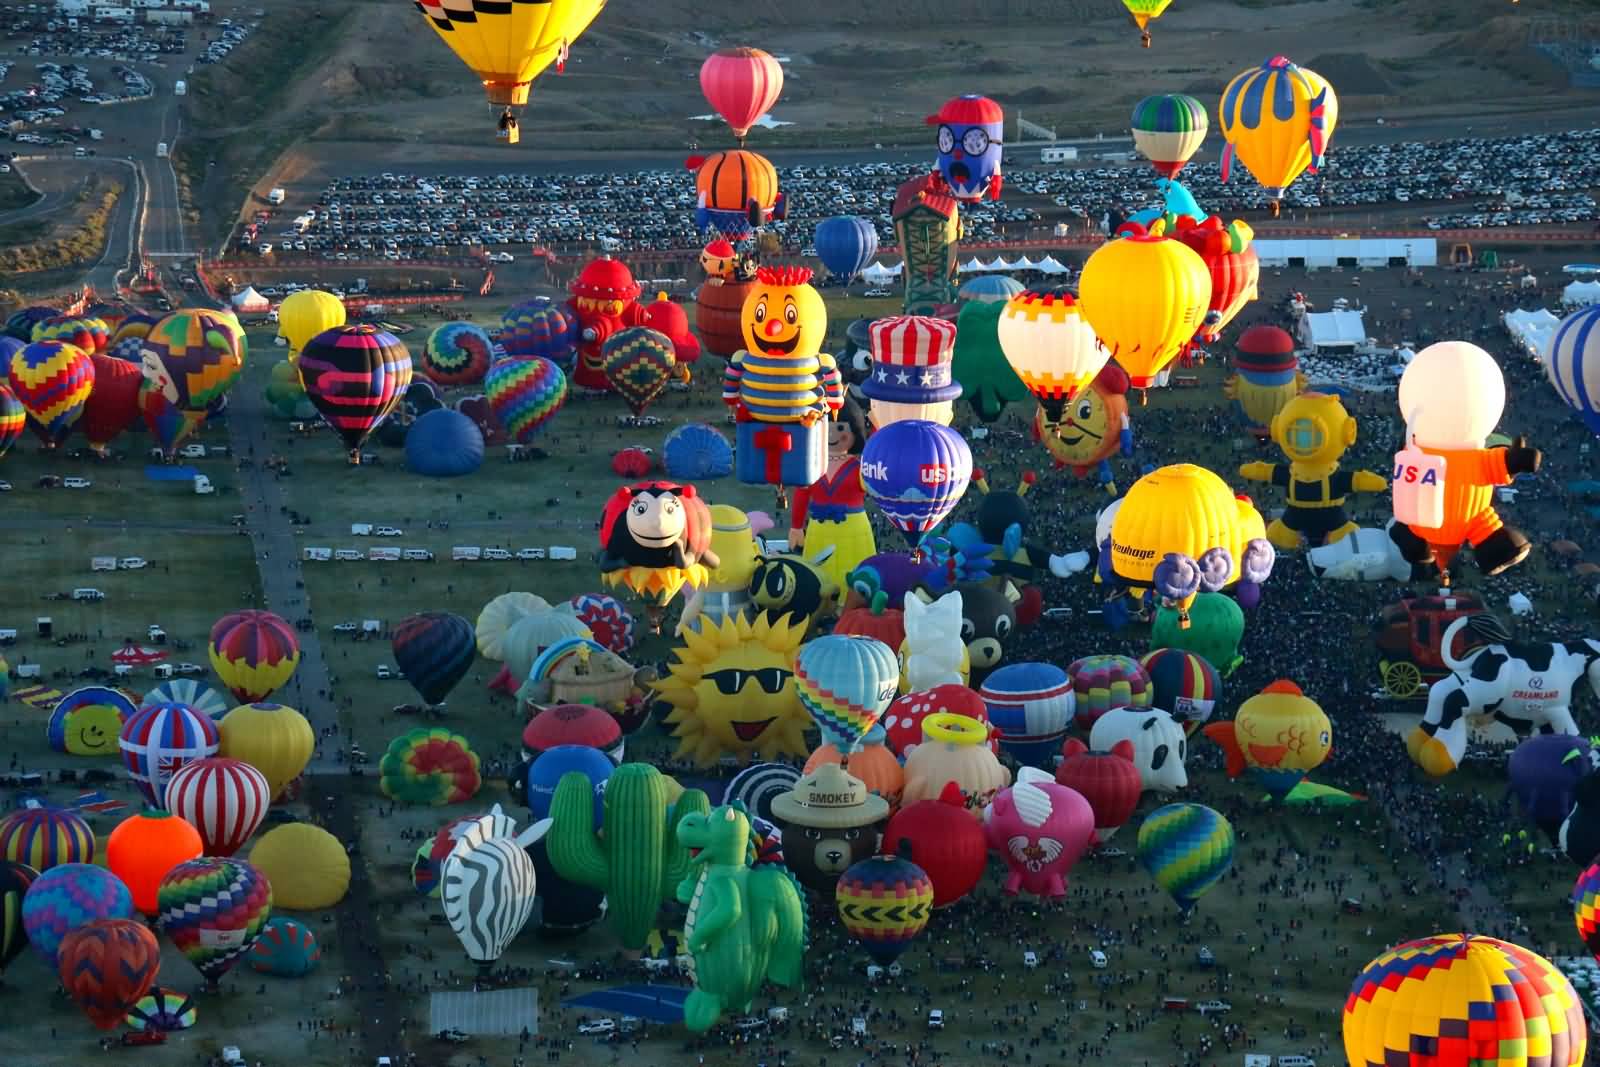 52 Most Beautiful Albuquerque International Balloon Festival Pictures And Photos